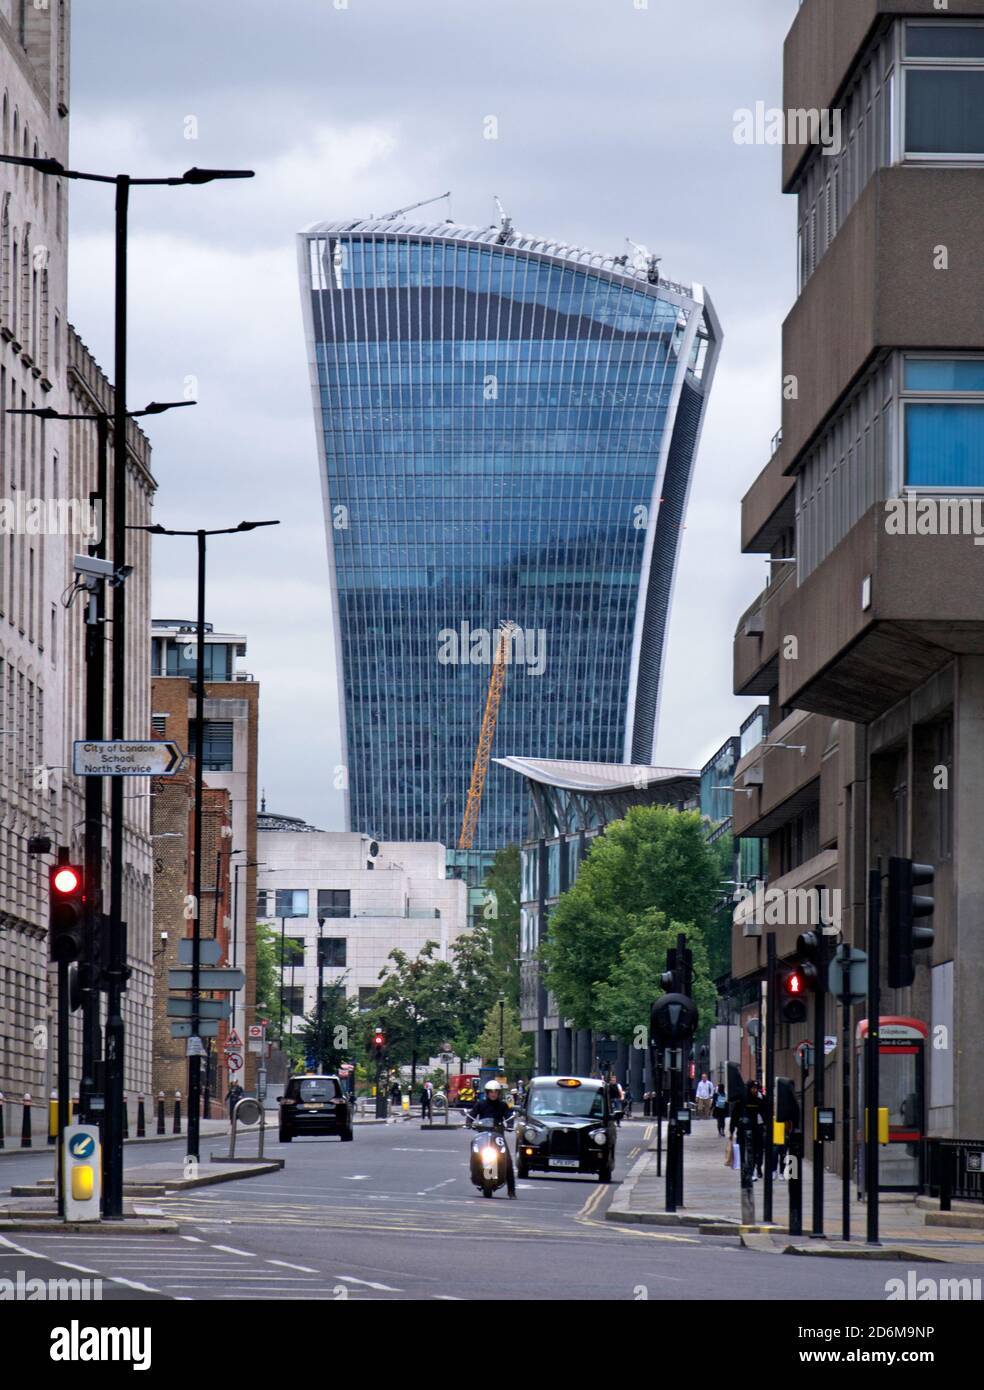 20 Fenchurch Street, also known as 'The Walkie-Talkie Building', London Stock Photo